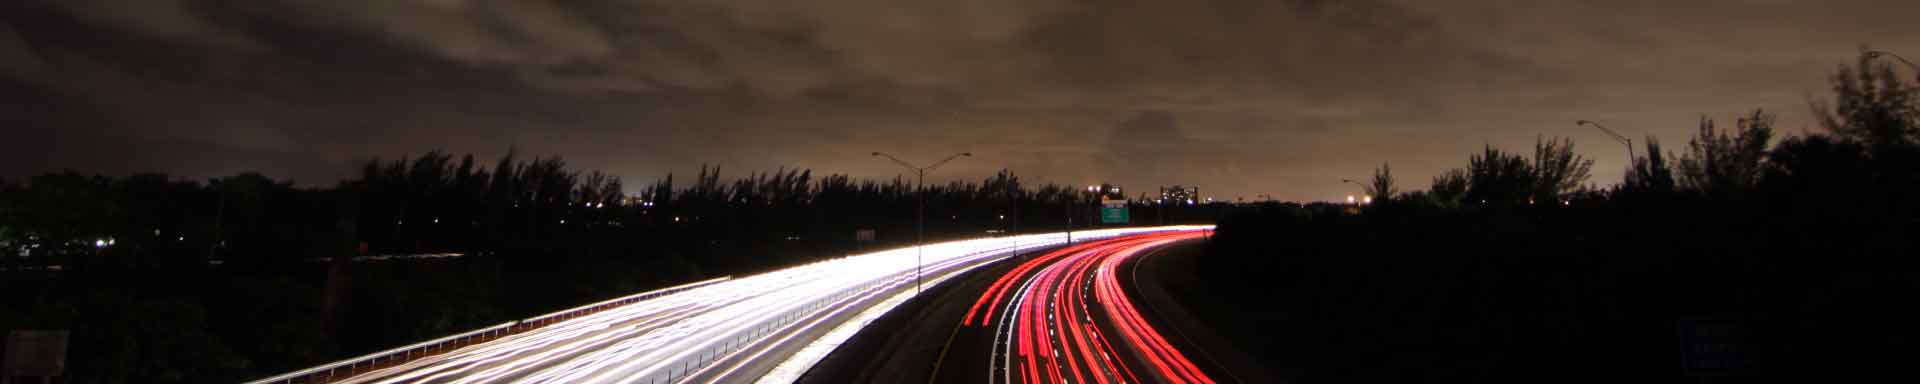 Photo of tail and head lights of traffic on a highway at night. Photo by Alec Attie on Unsplash